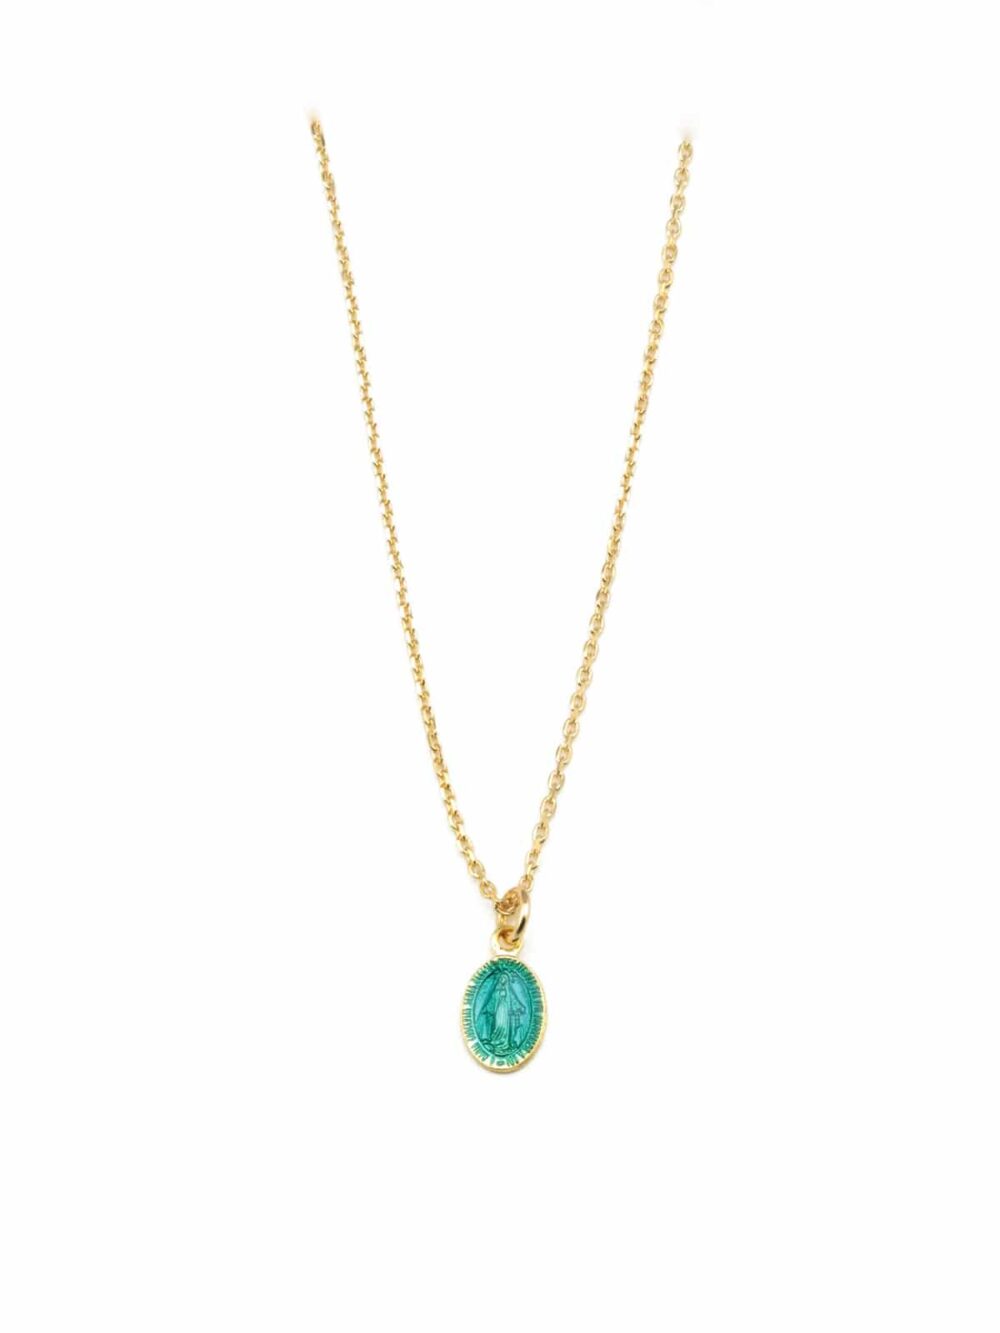 Necklace turquoise miracle locket luj paris jewels